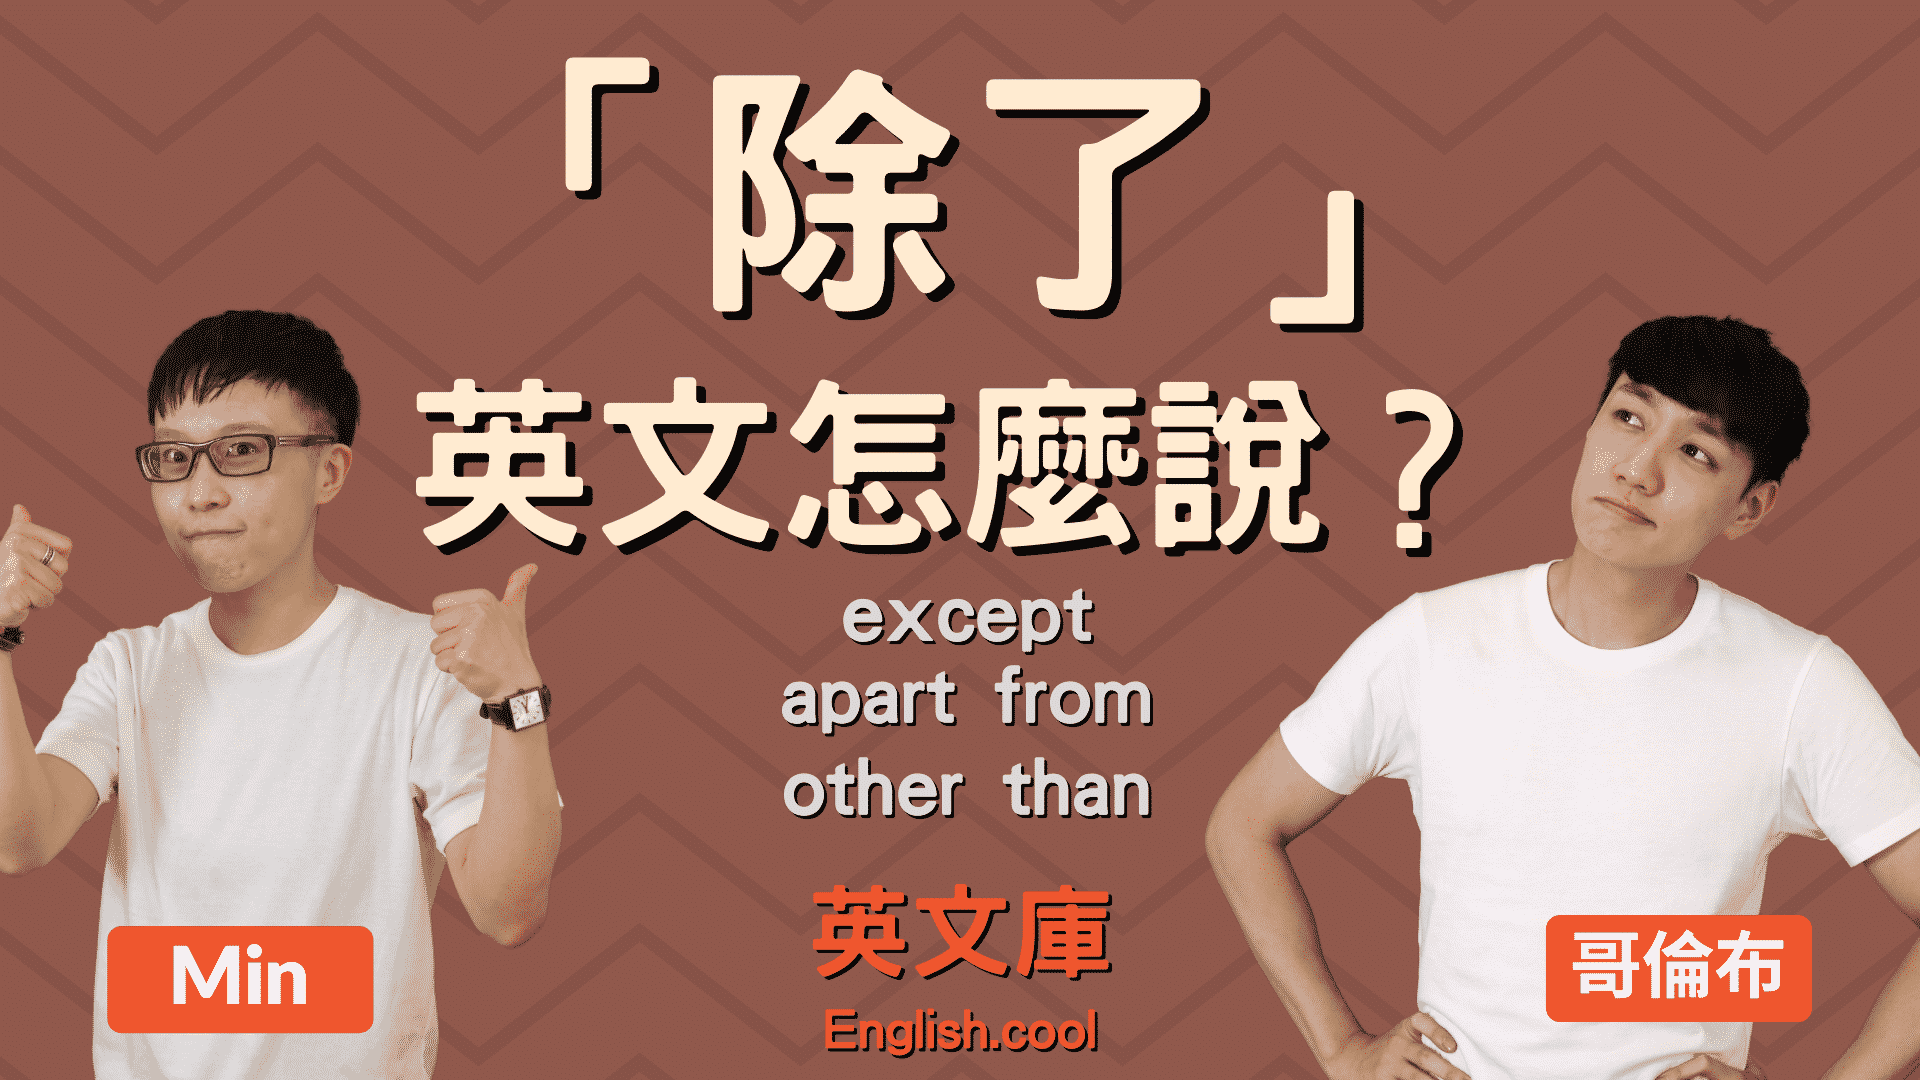 You are currently viewing 「除了…」英文怎麼說？ Except, Apart from, Other than 等的用法！